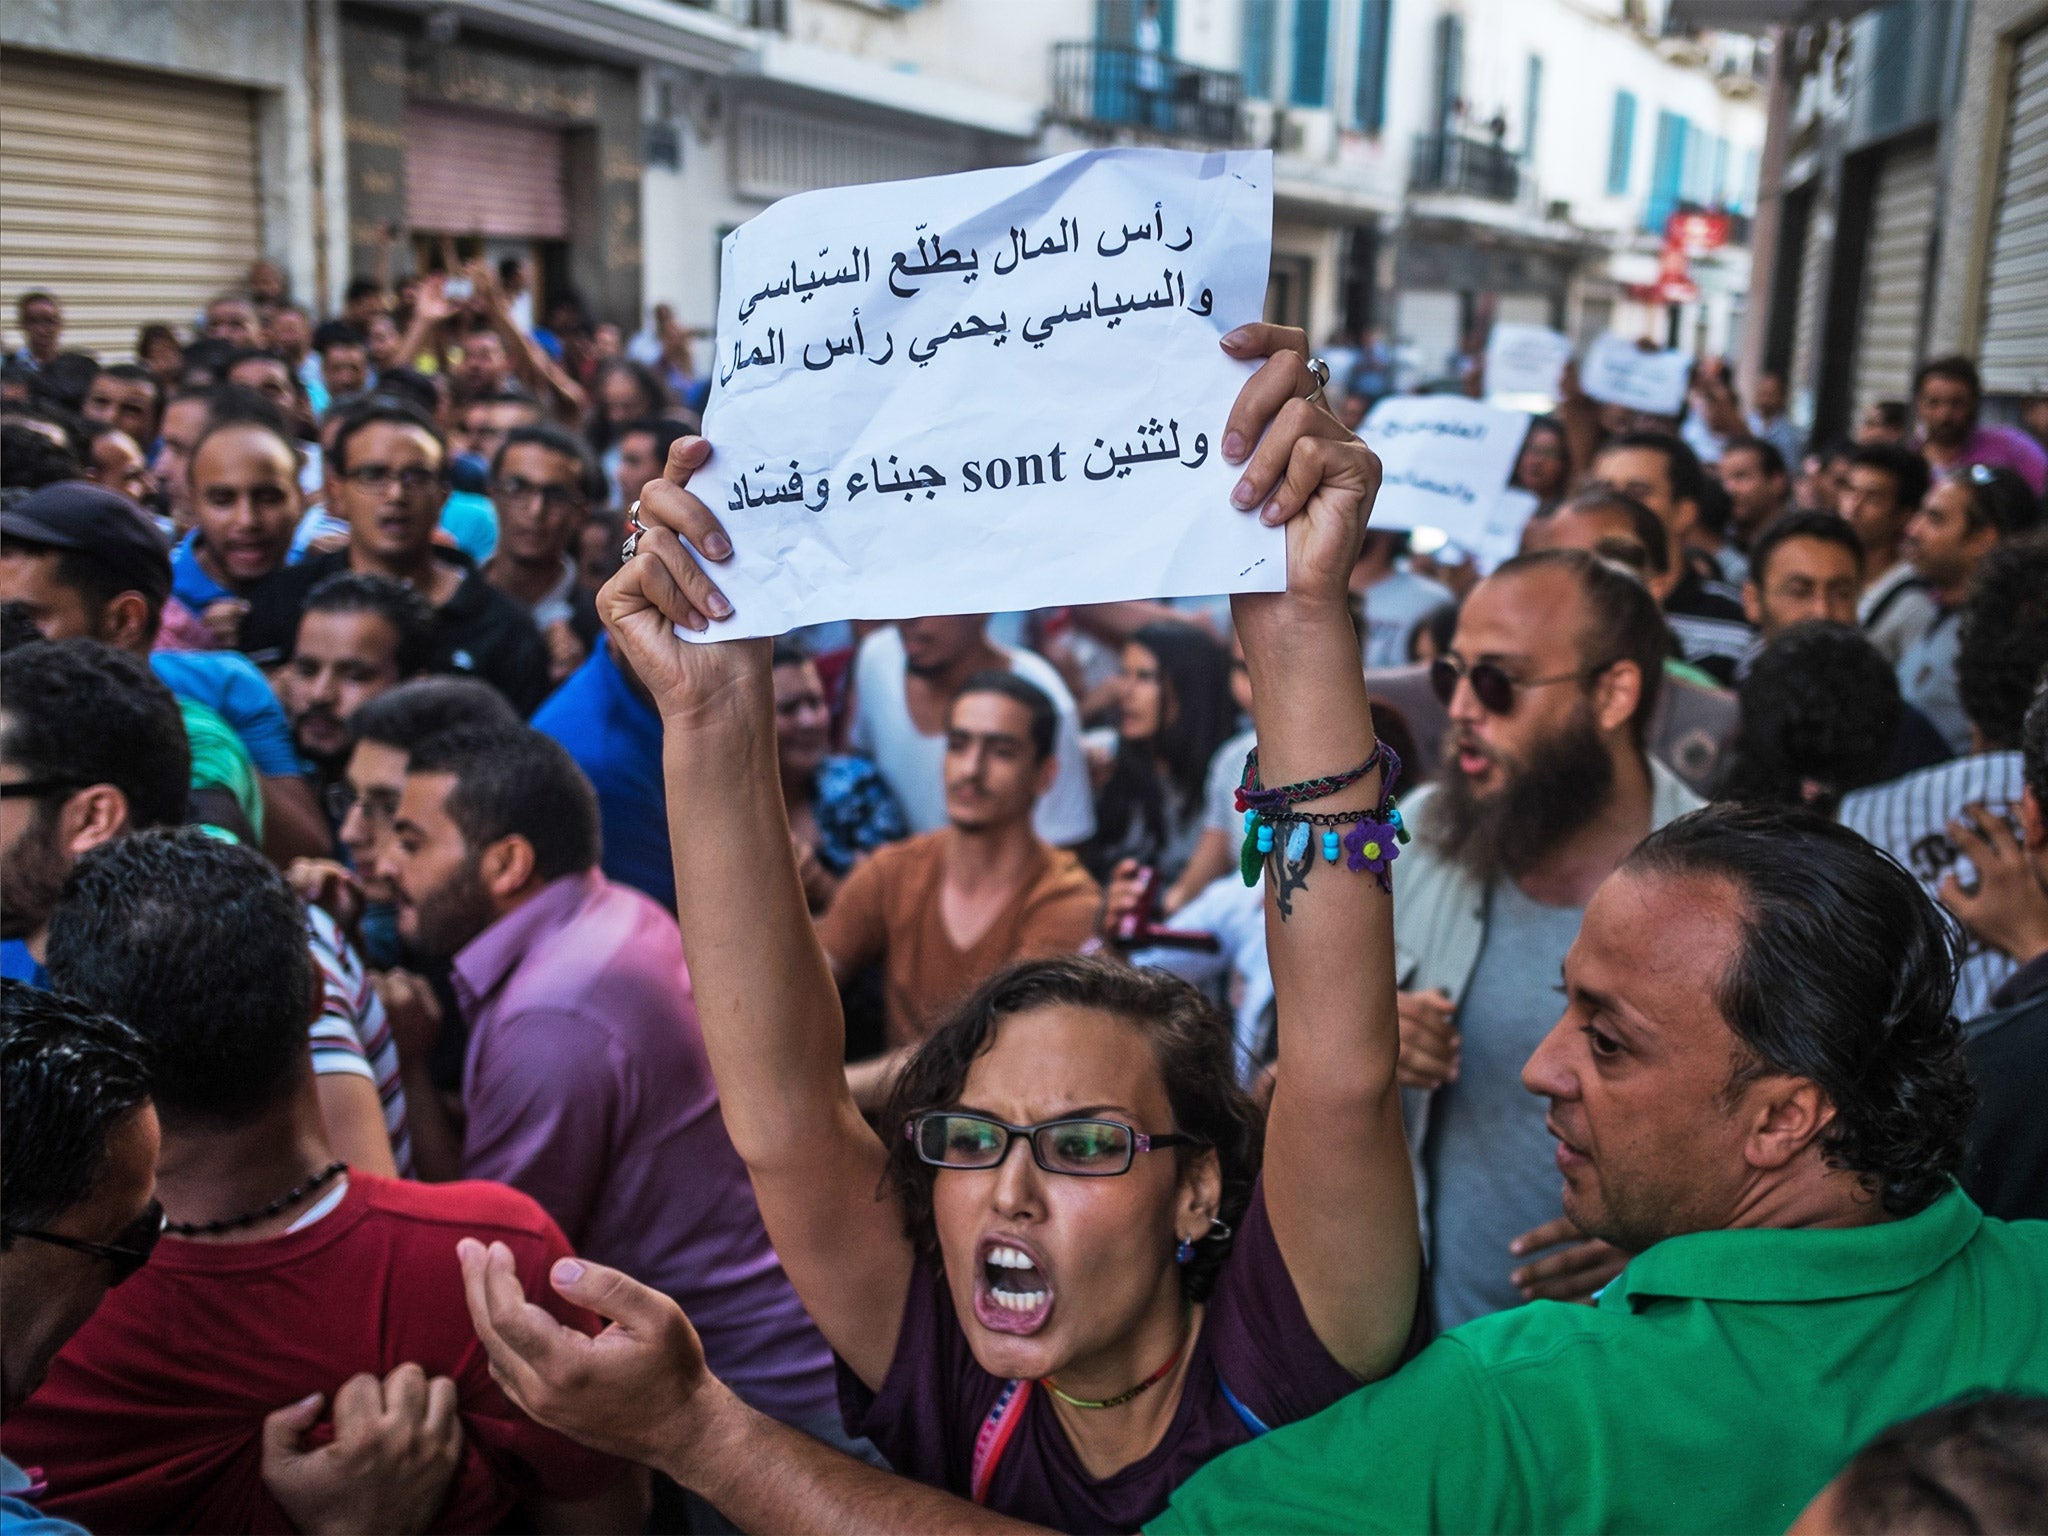 Demonstrators rally in Tunis on Tuesday against a planned financial amnesty for members of former President Zine el-Abidine Ben Ali’s regime. Some protesters were beaten up and arrested